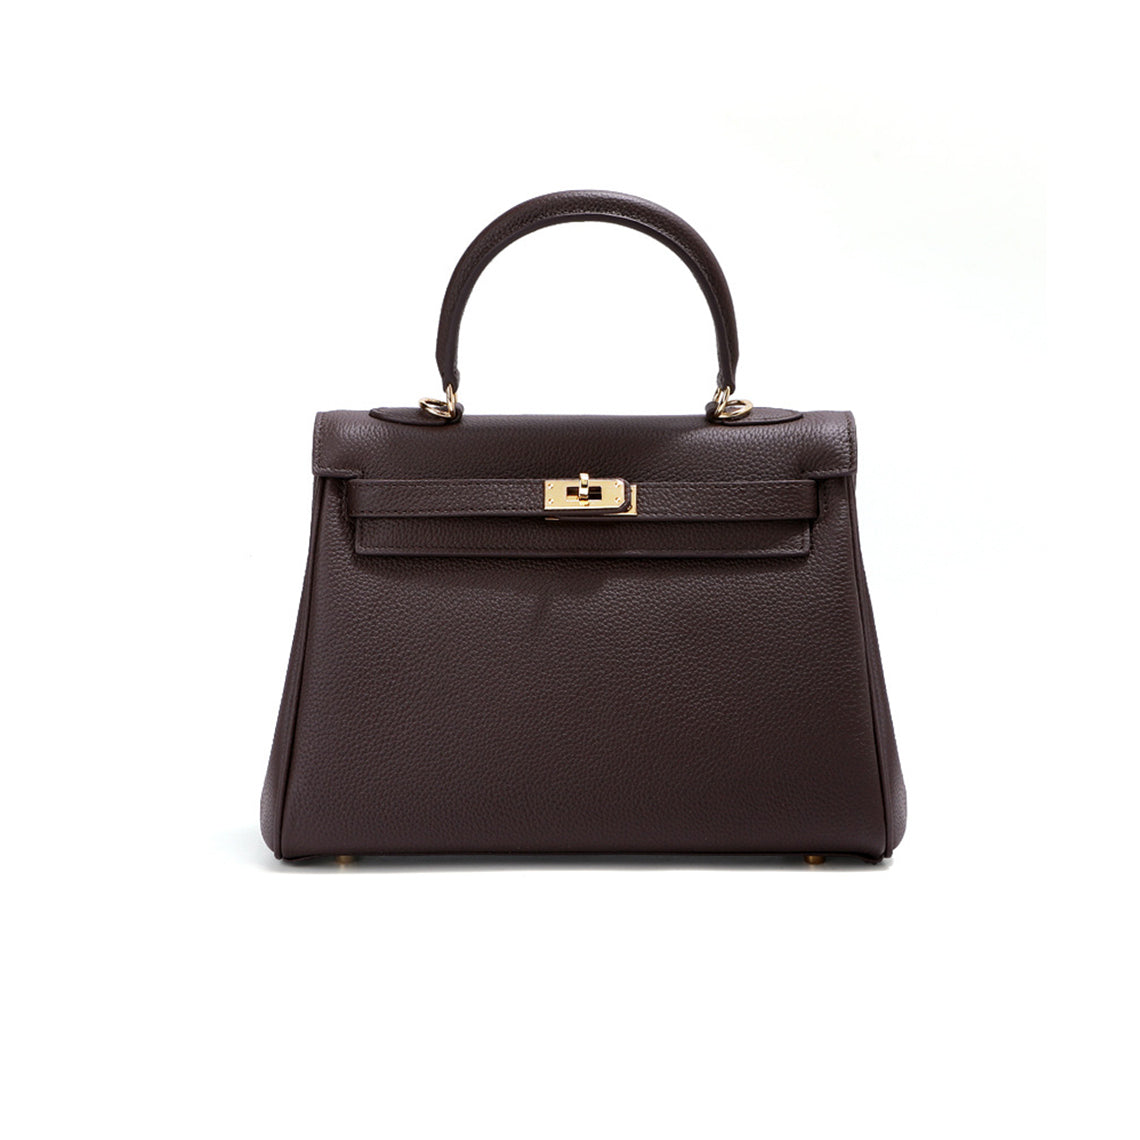 Top Grain Leather Inspired Kelly Bag